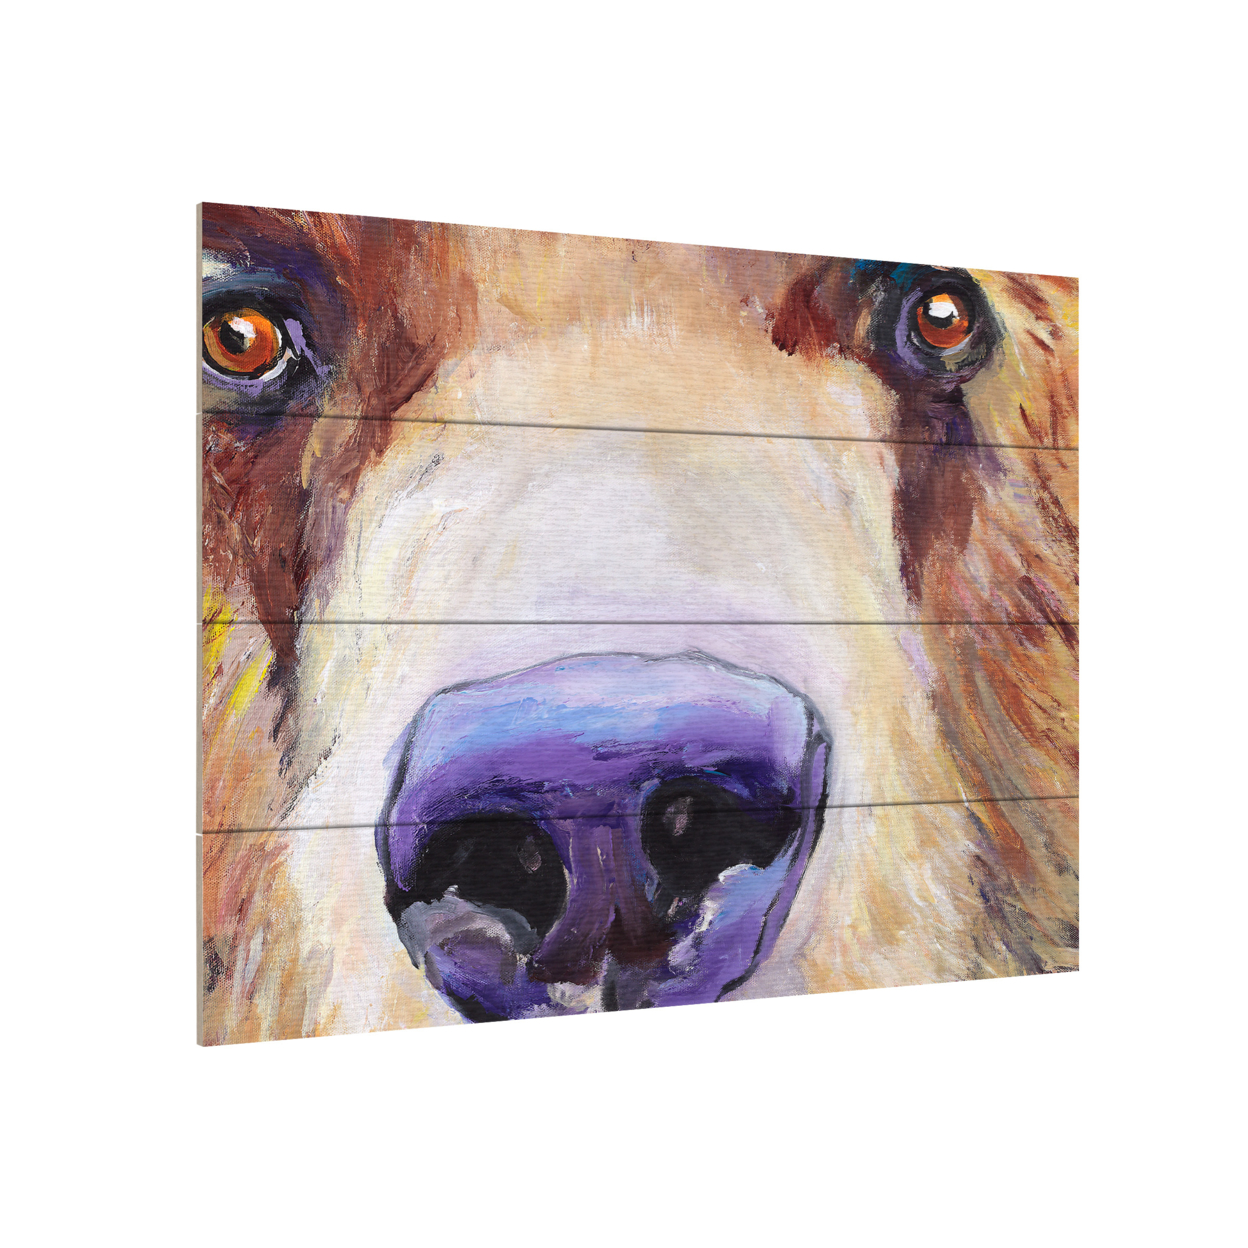 Wall Art 12 X 16 Inches Titled The Sniffer Ready To Hang Printed On Wooden Planks